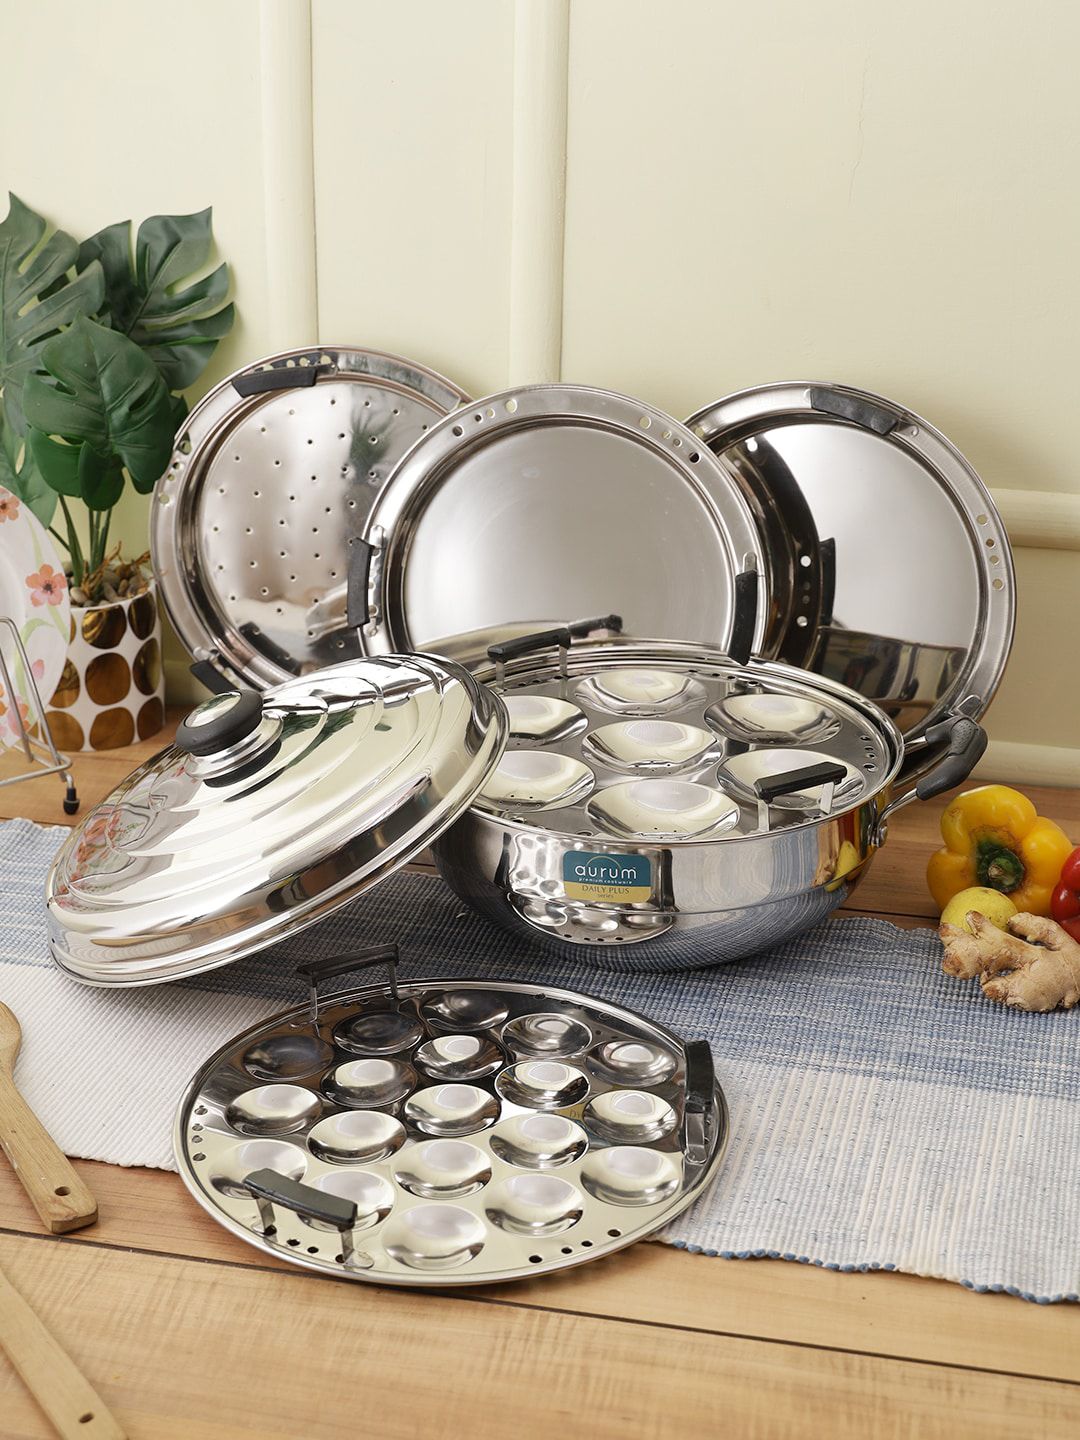 AURUM Silver-Toned Solid Stainless Steel Idli Maker Price in India